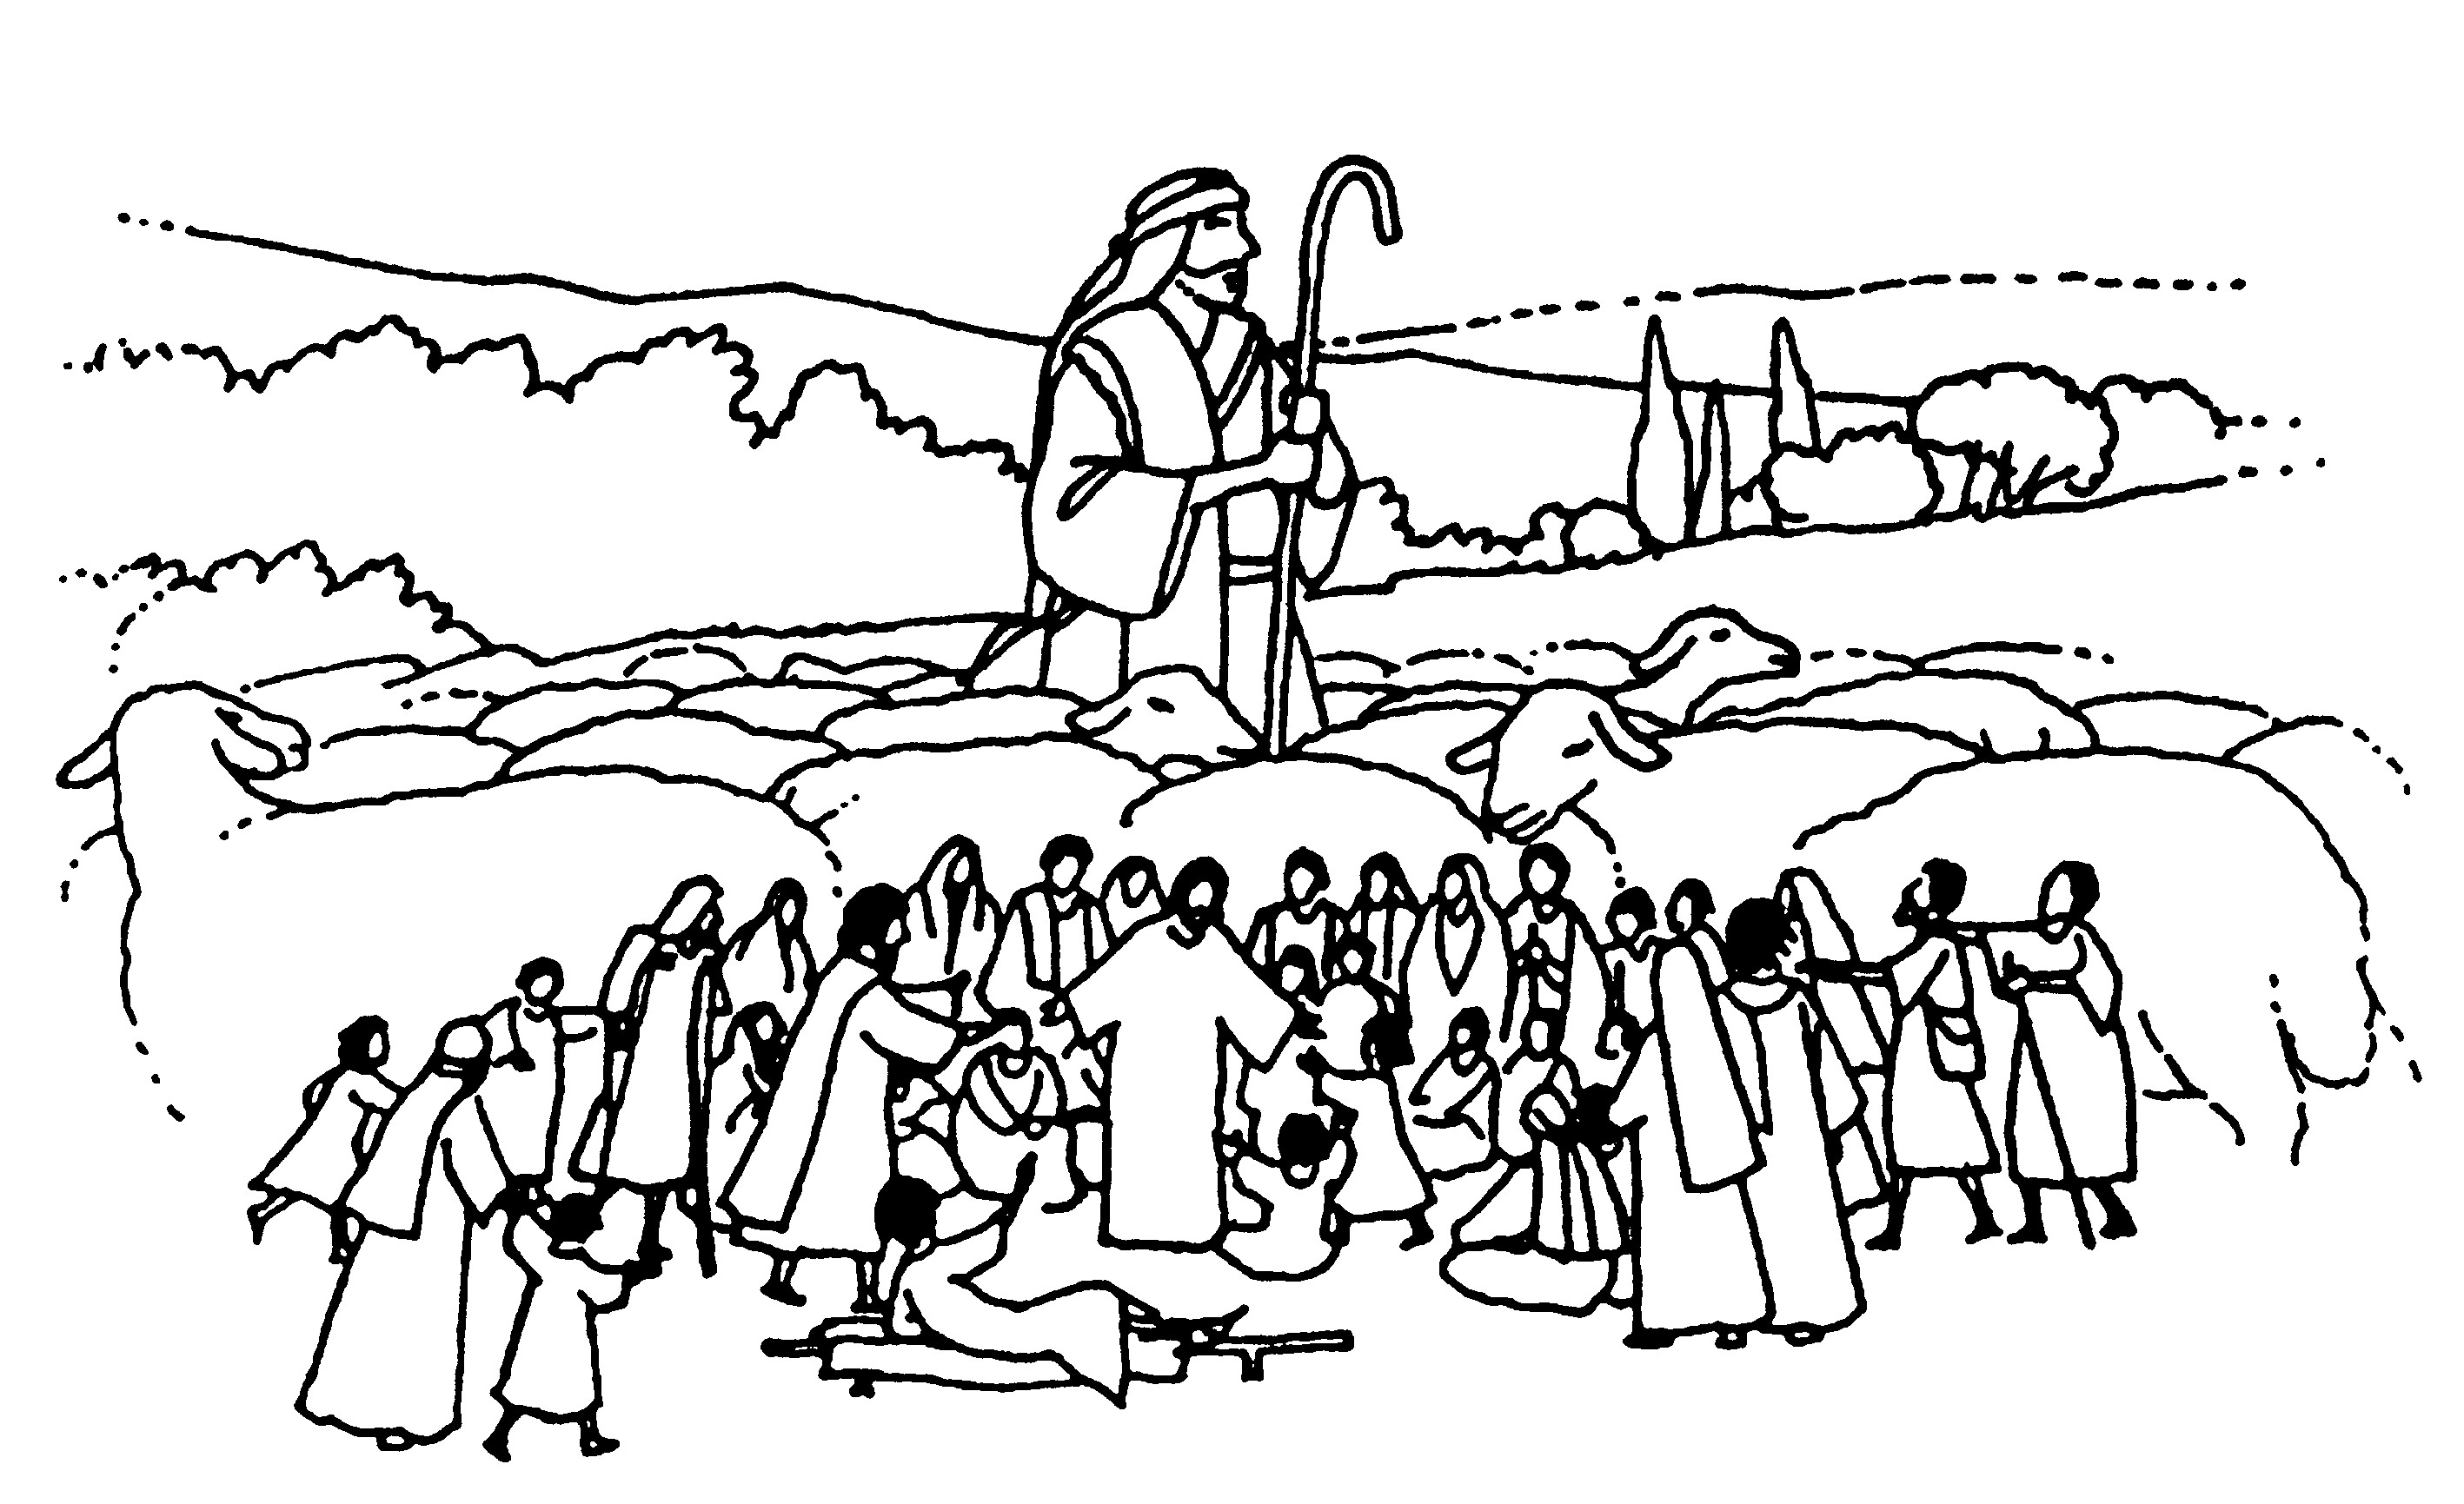 Coloring Pages Sheep And The Shepherd Coloring Pages For Kids Lost Sheep With 7 Shepherd Drawing Parable